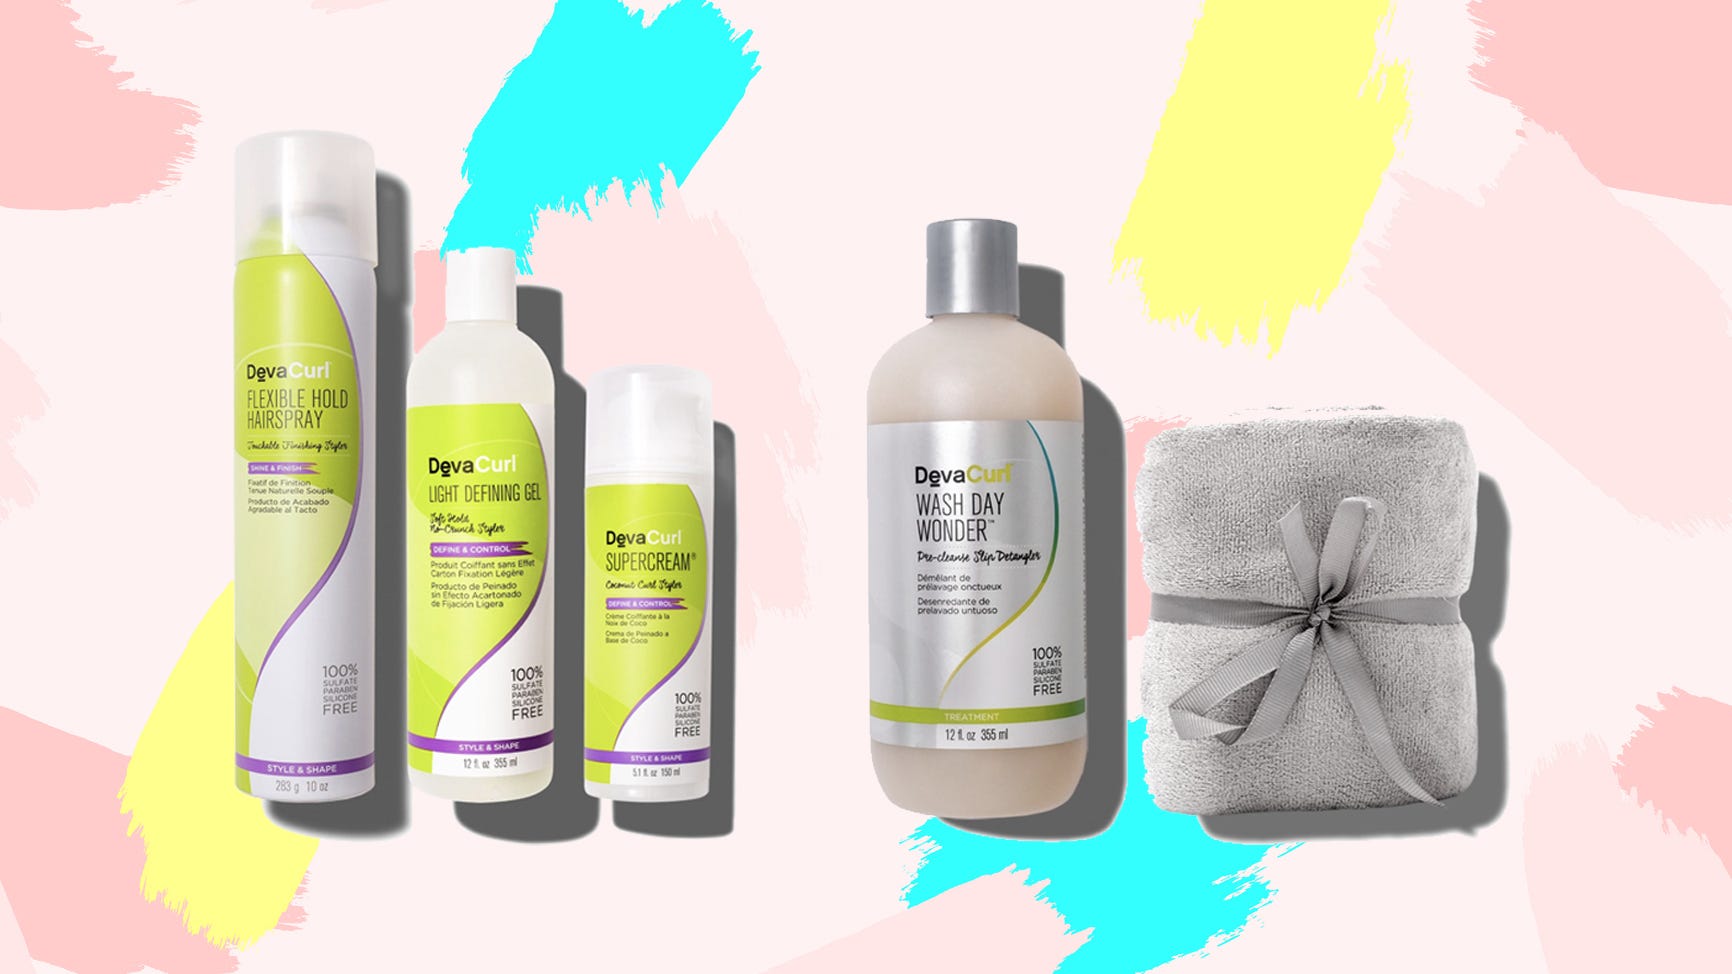 Our favorite DevaCurl hair products are on sale right now